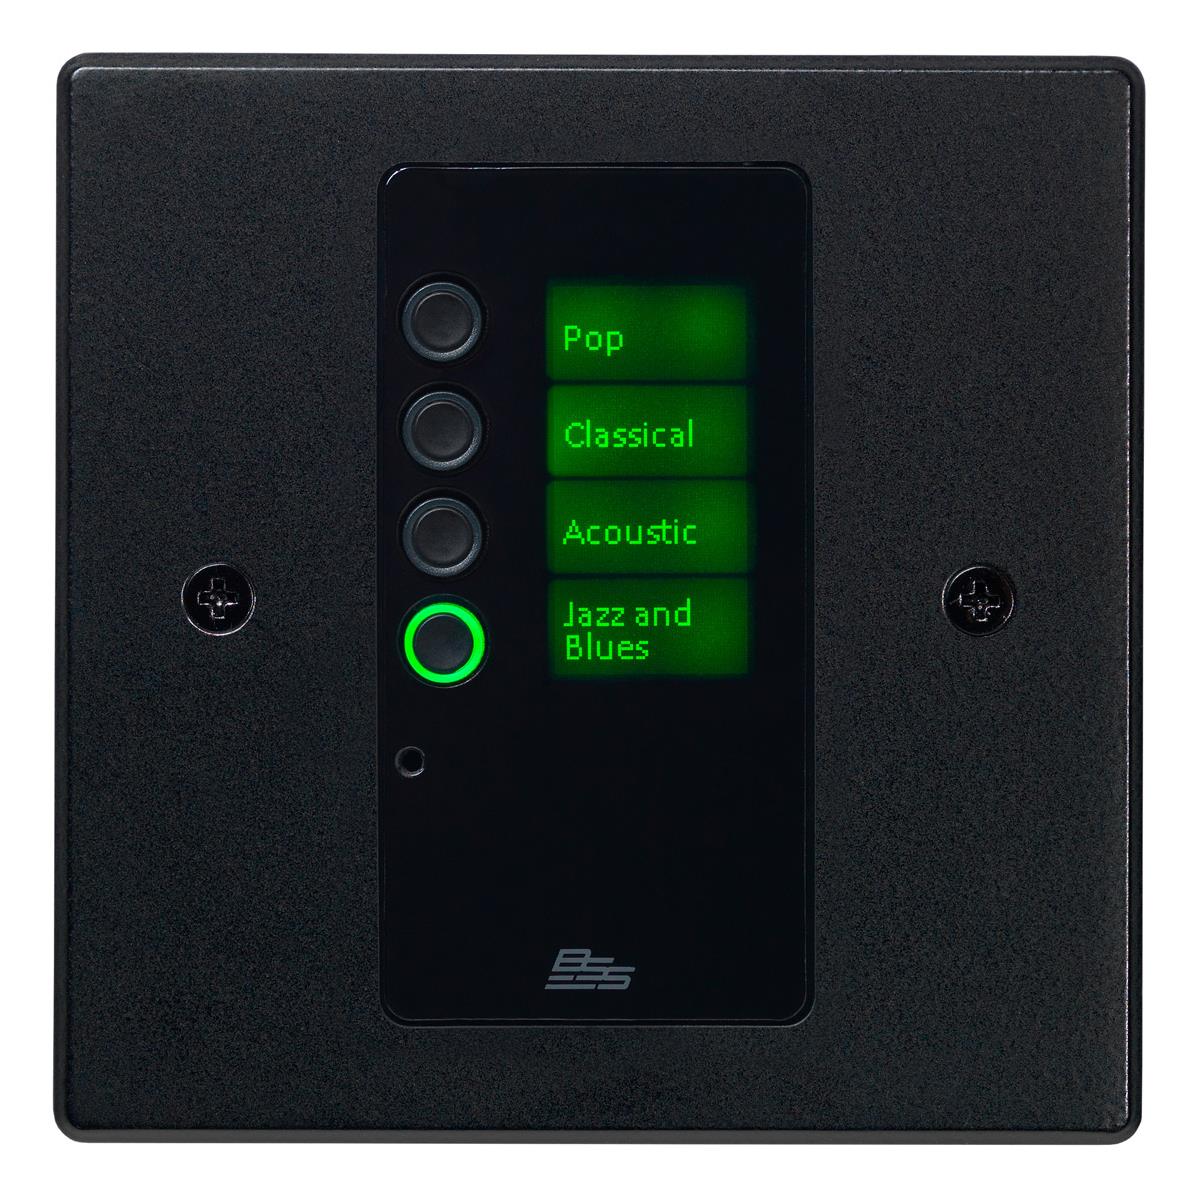 Image of BSS EC-4B Ethernet Controller with 4 Buttons